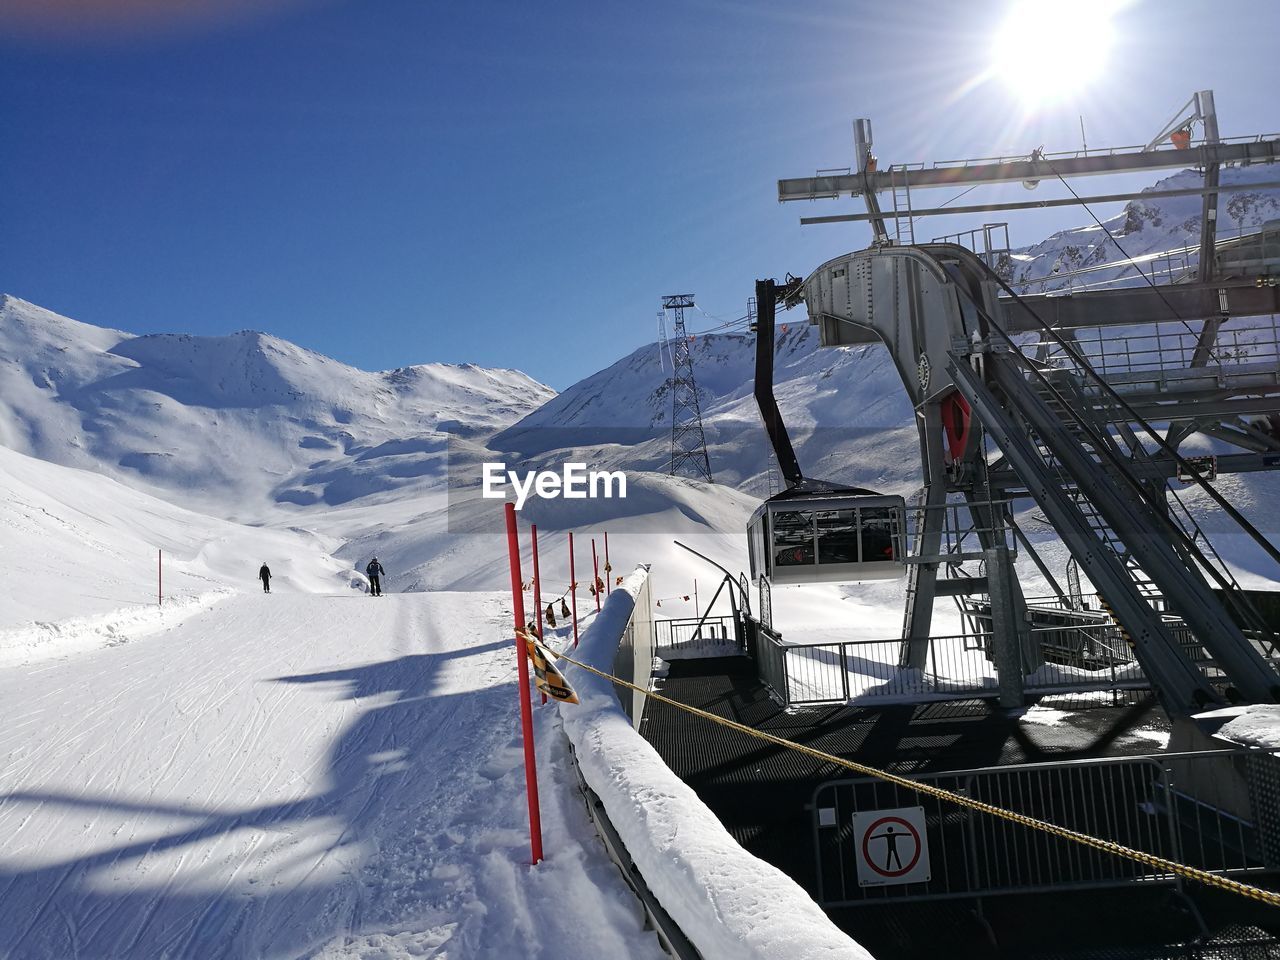 VIEW OF SKI LIFT IN SNOW